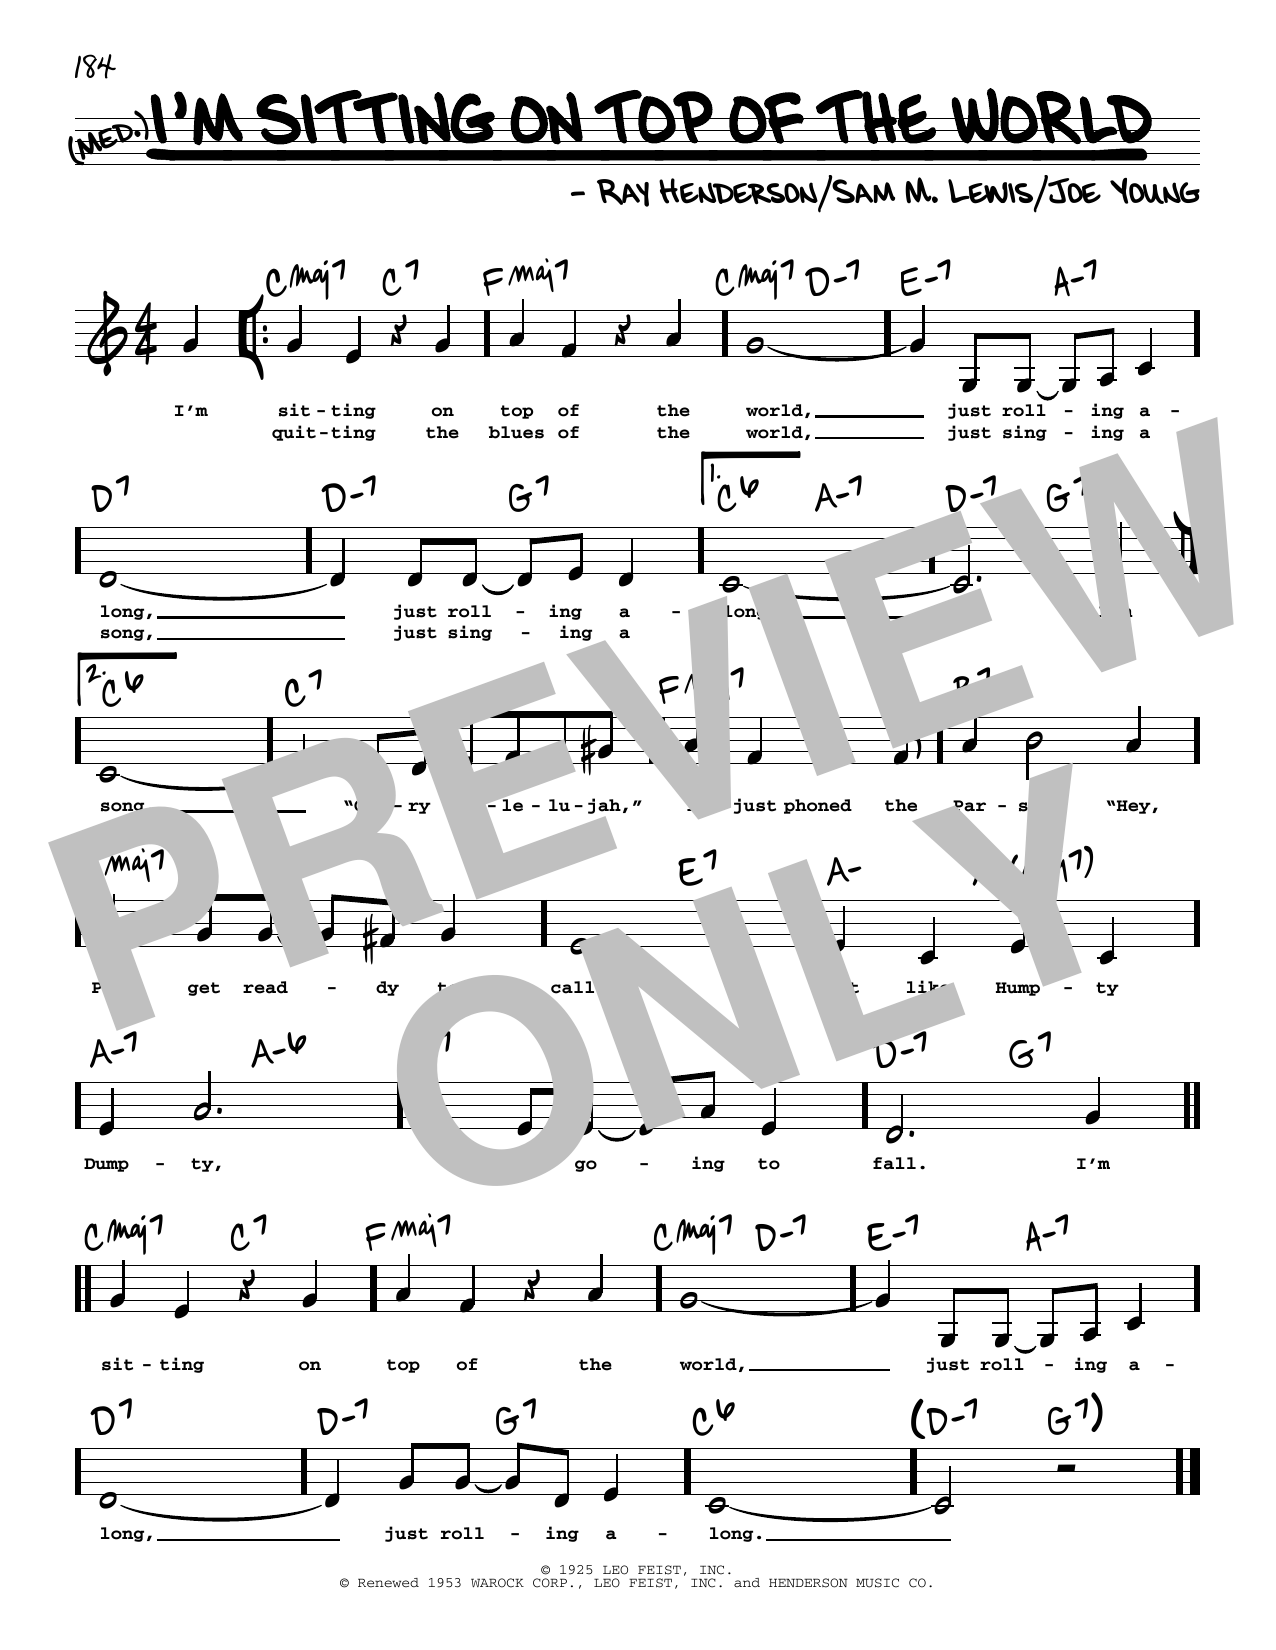 Sam M. Lewis I'm Sitting On Top Of The World (Low Voice) sheet music notes printable PDF score